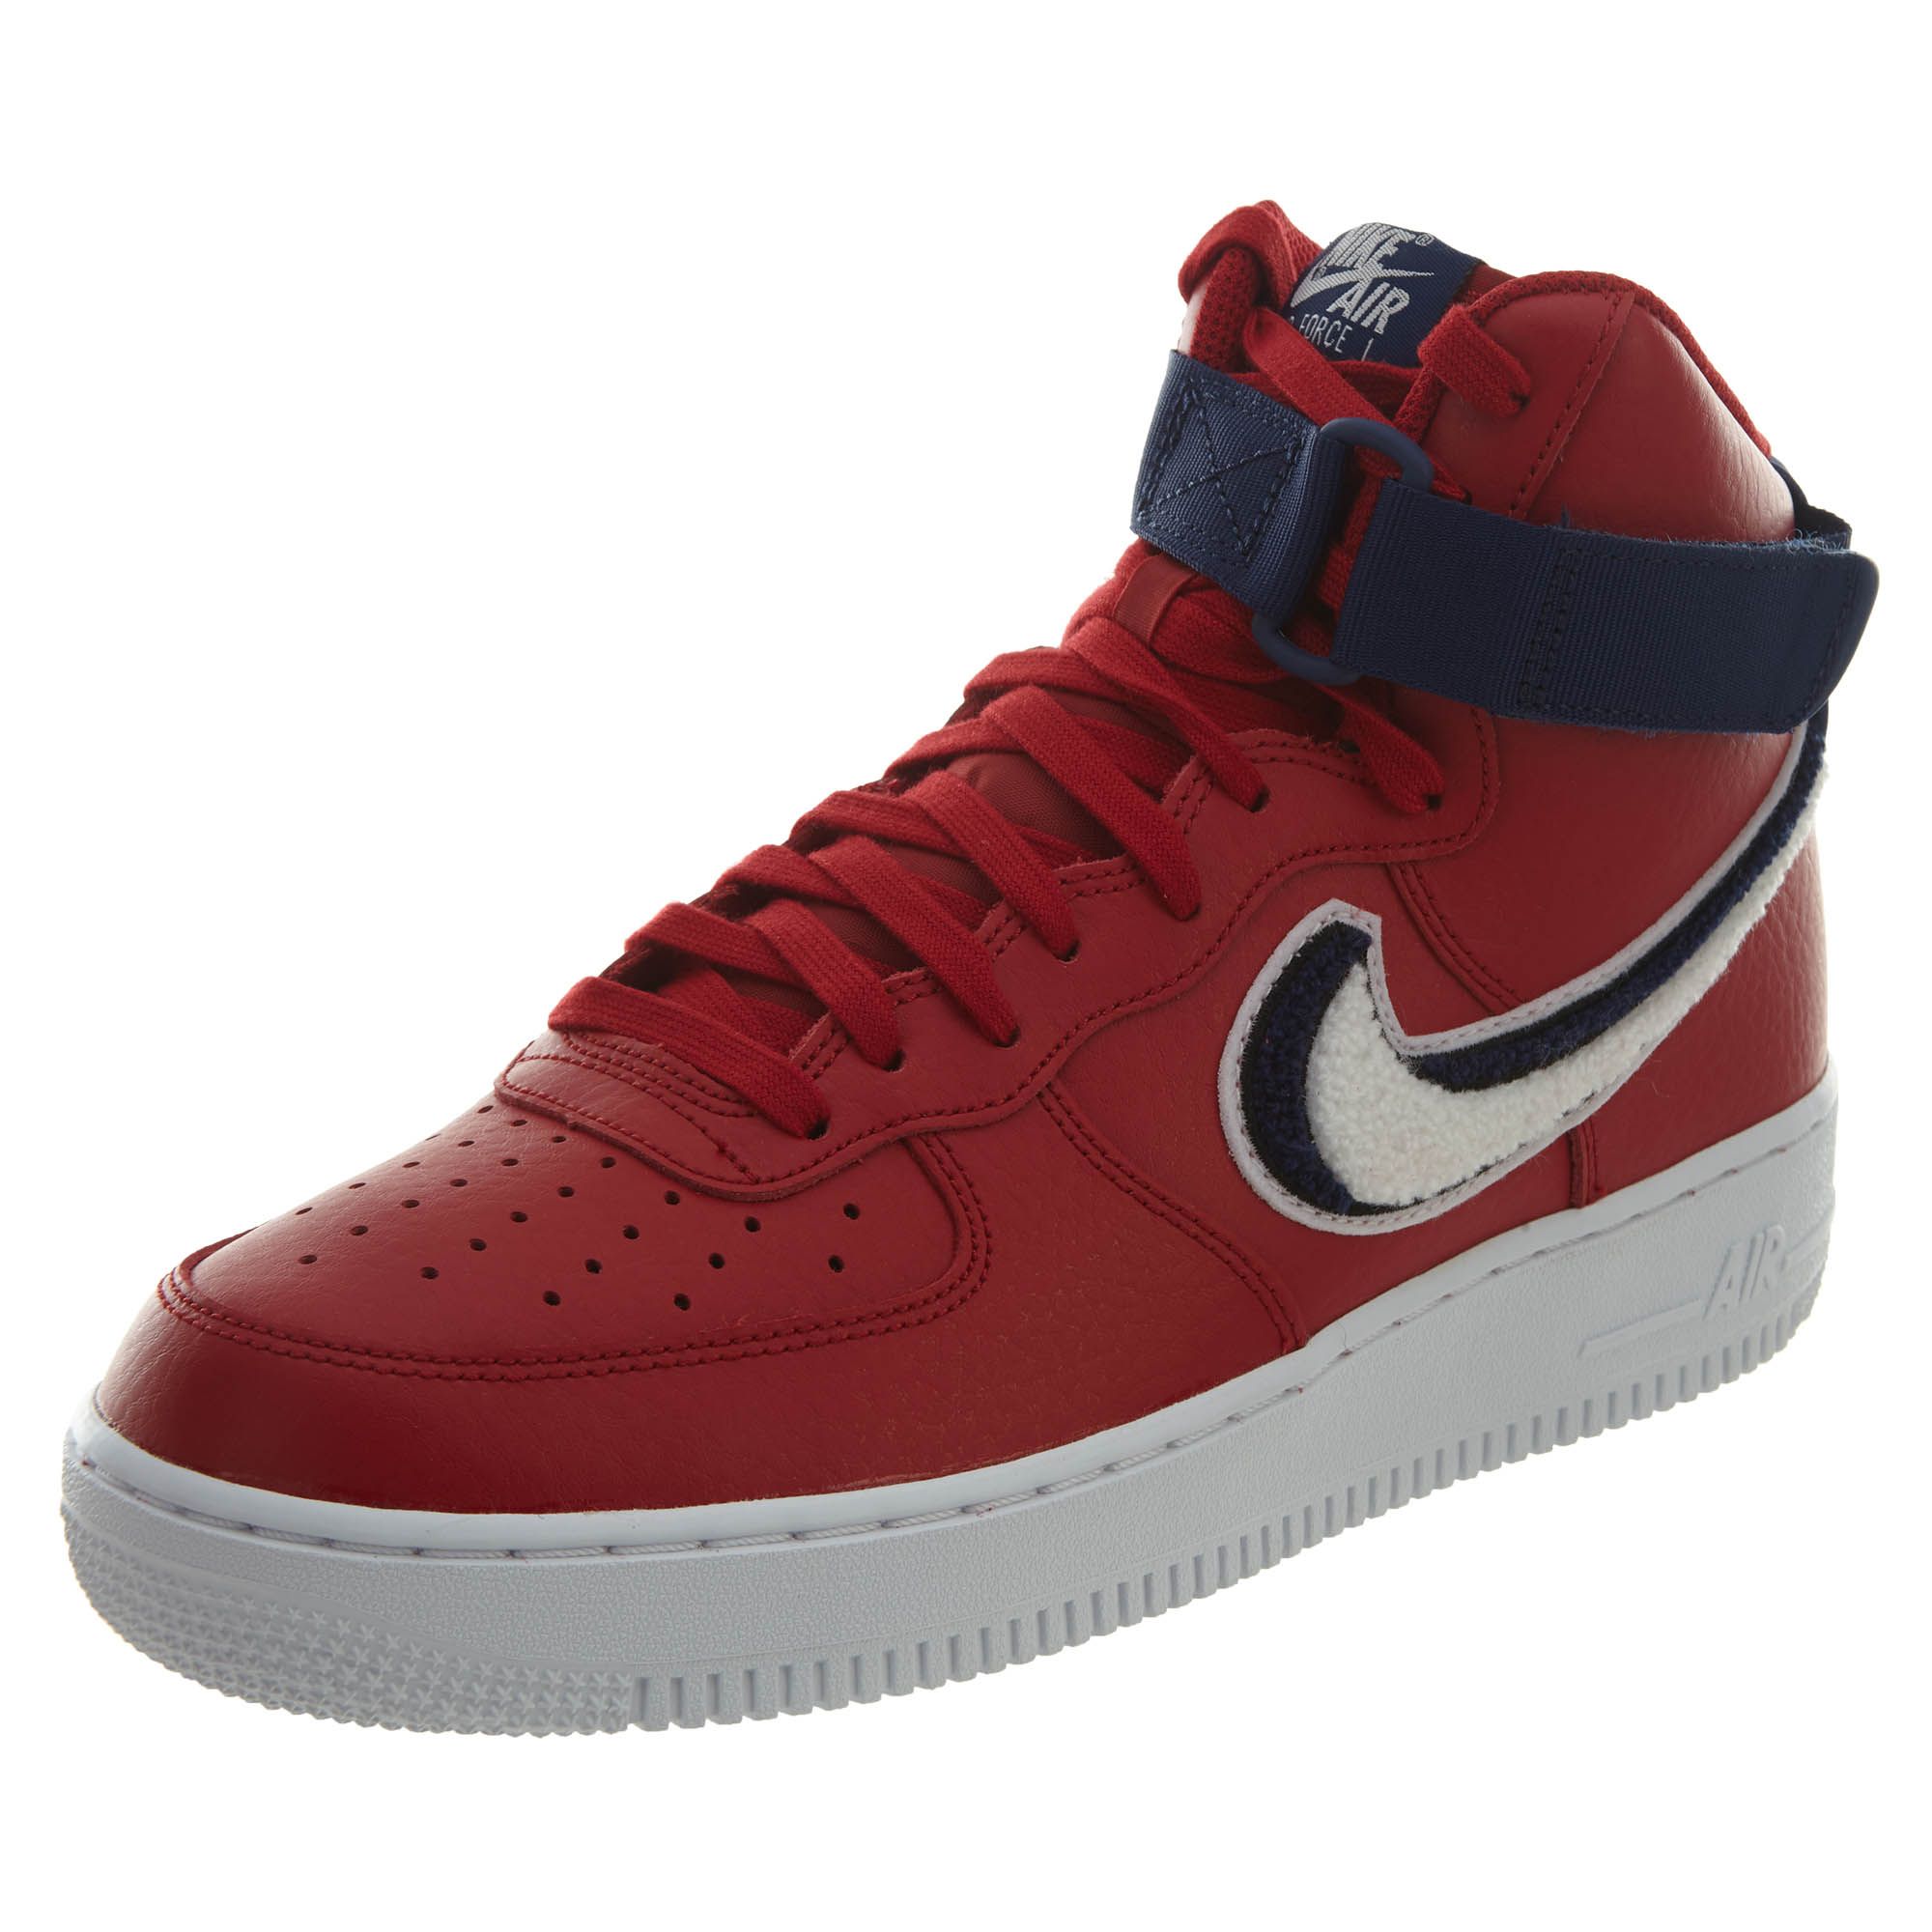 red and blue air force 1 high top